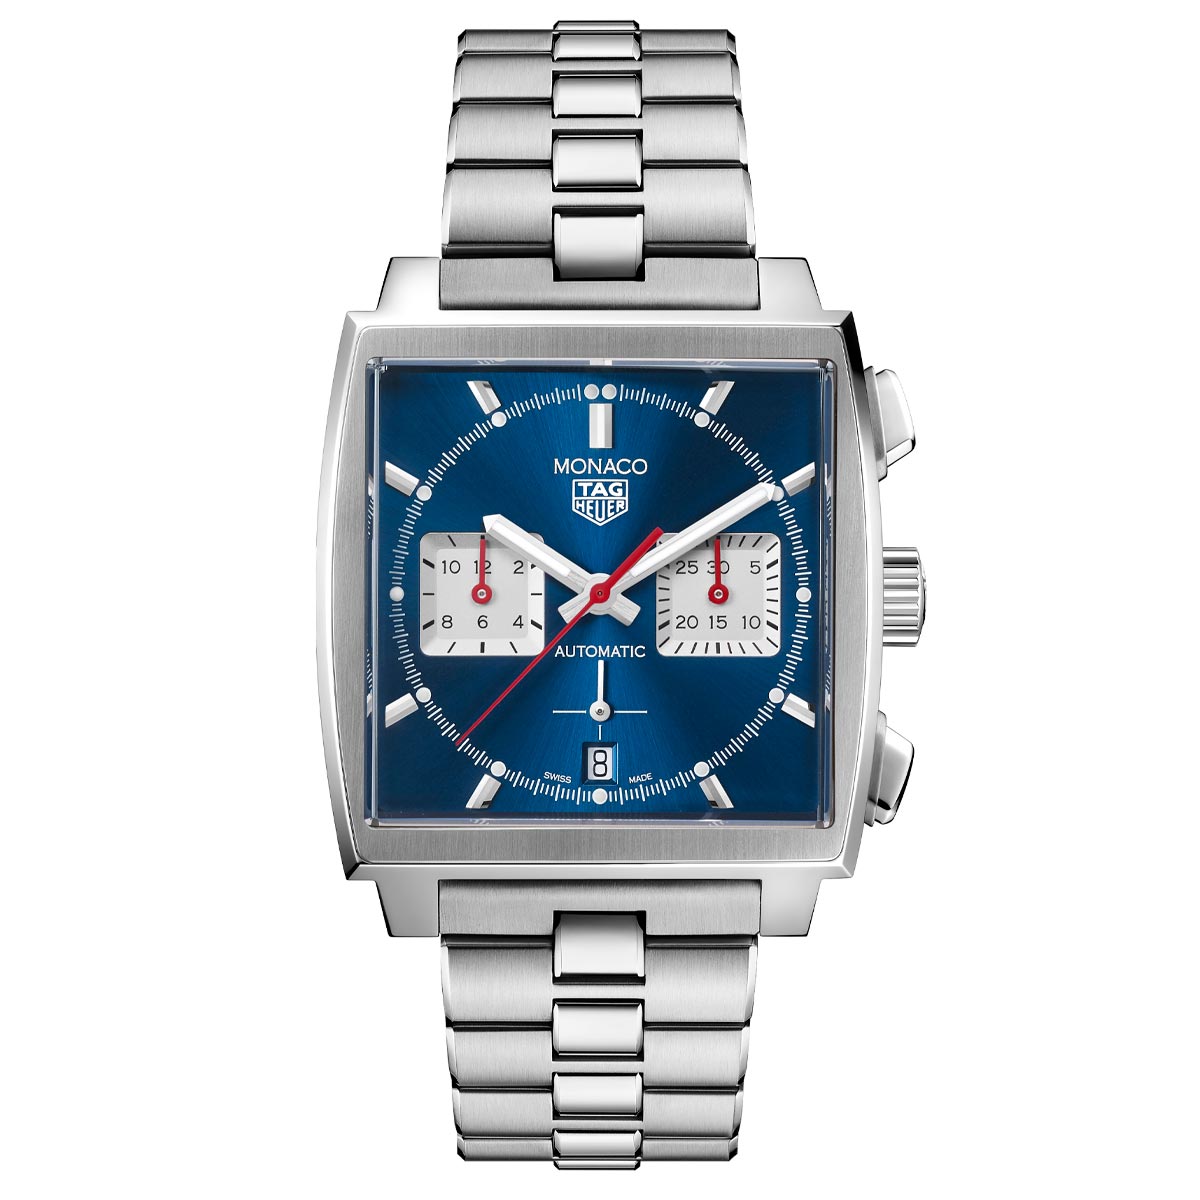 TAG Heuer Monaco Calibre HEUER02 Automatic Chronograph 39mm Watch